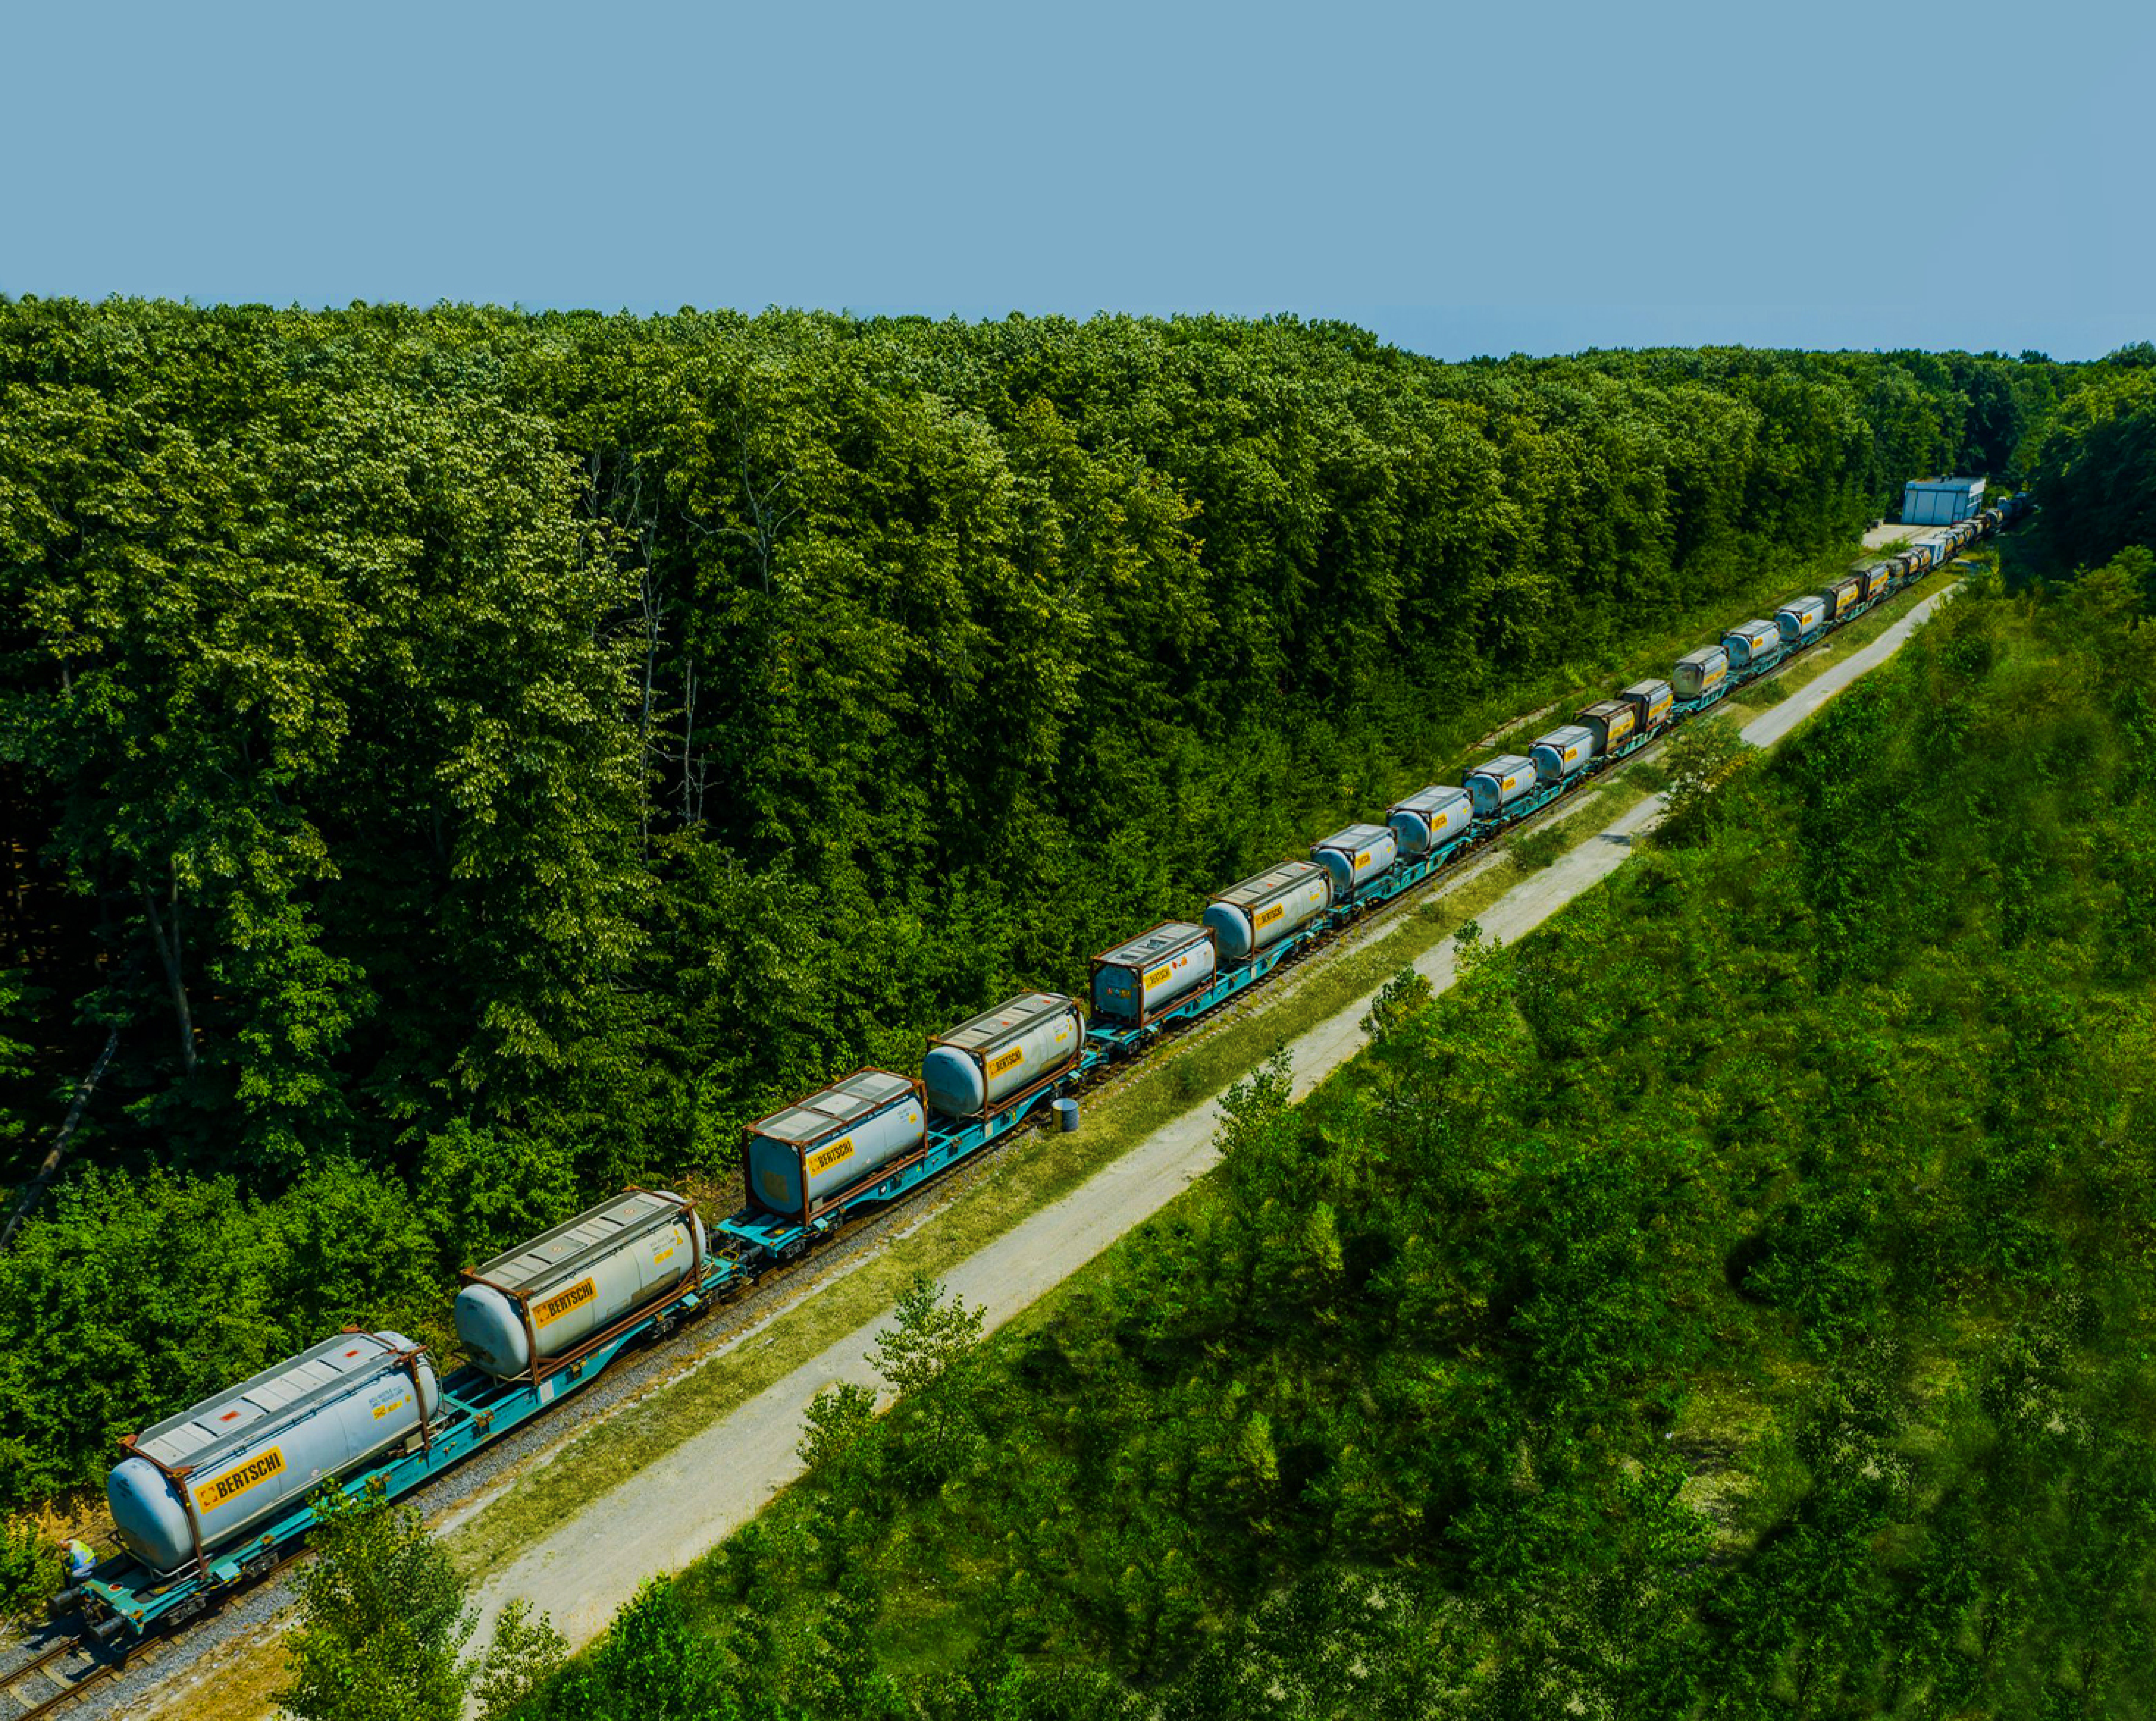 Cargo train filled with Bertschi containers passing through a green forest area